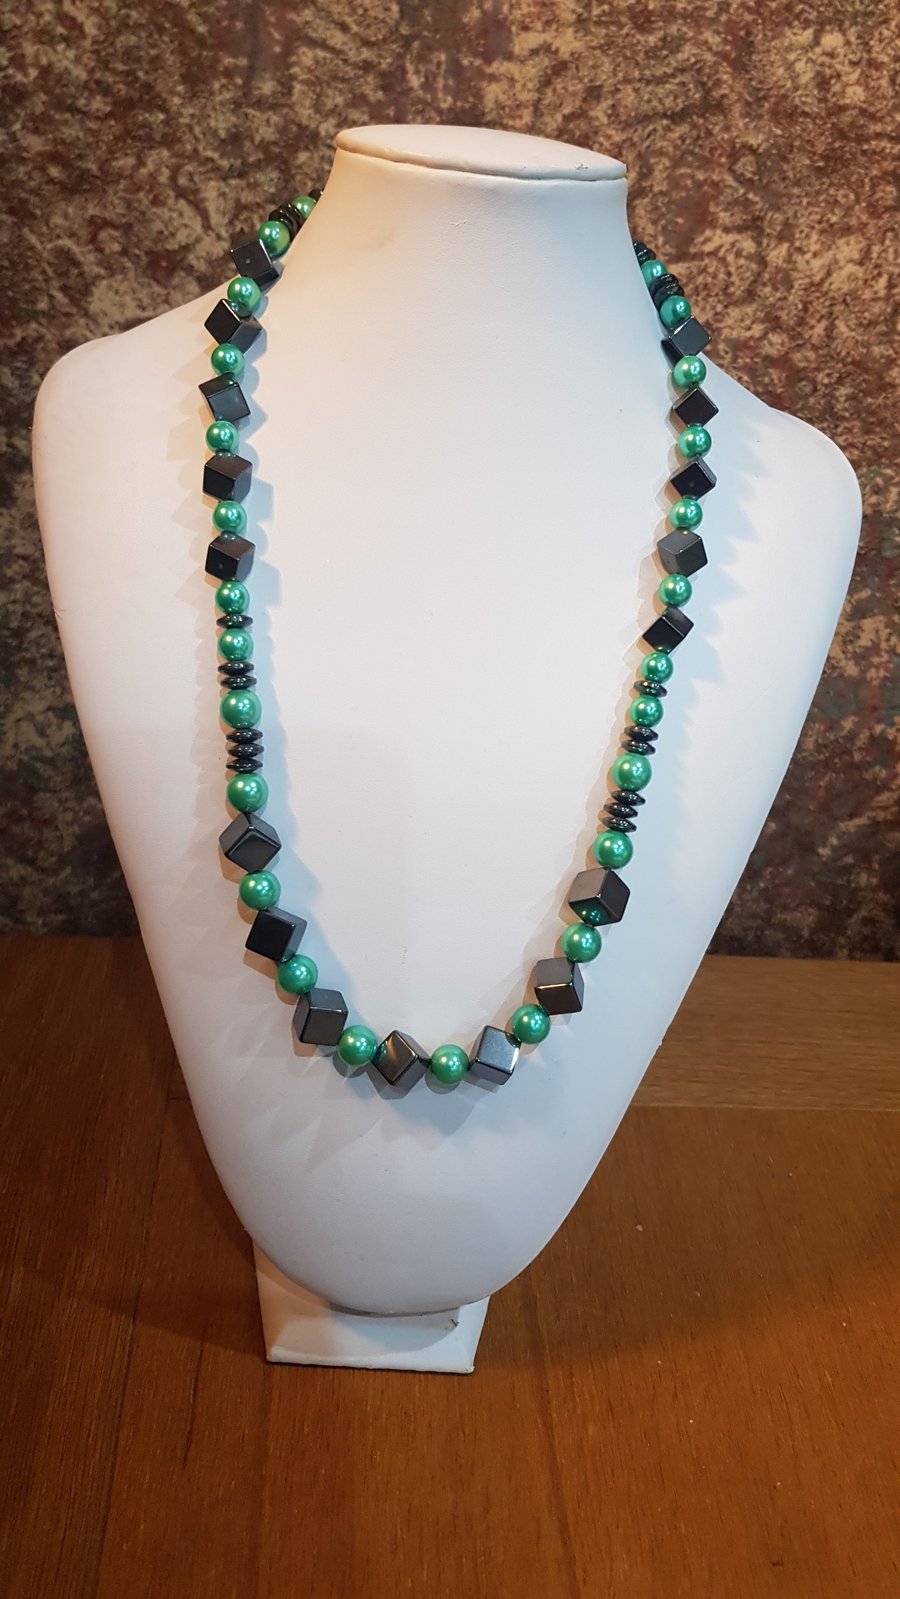 Hematite and vibrant green glass pearl necklace